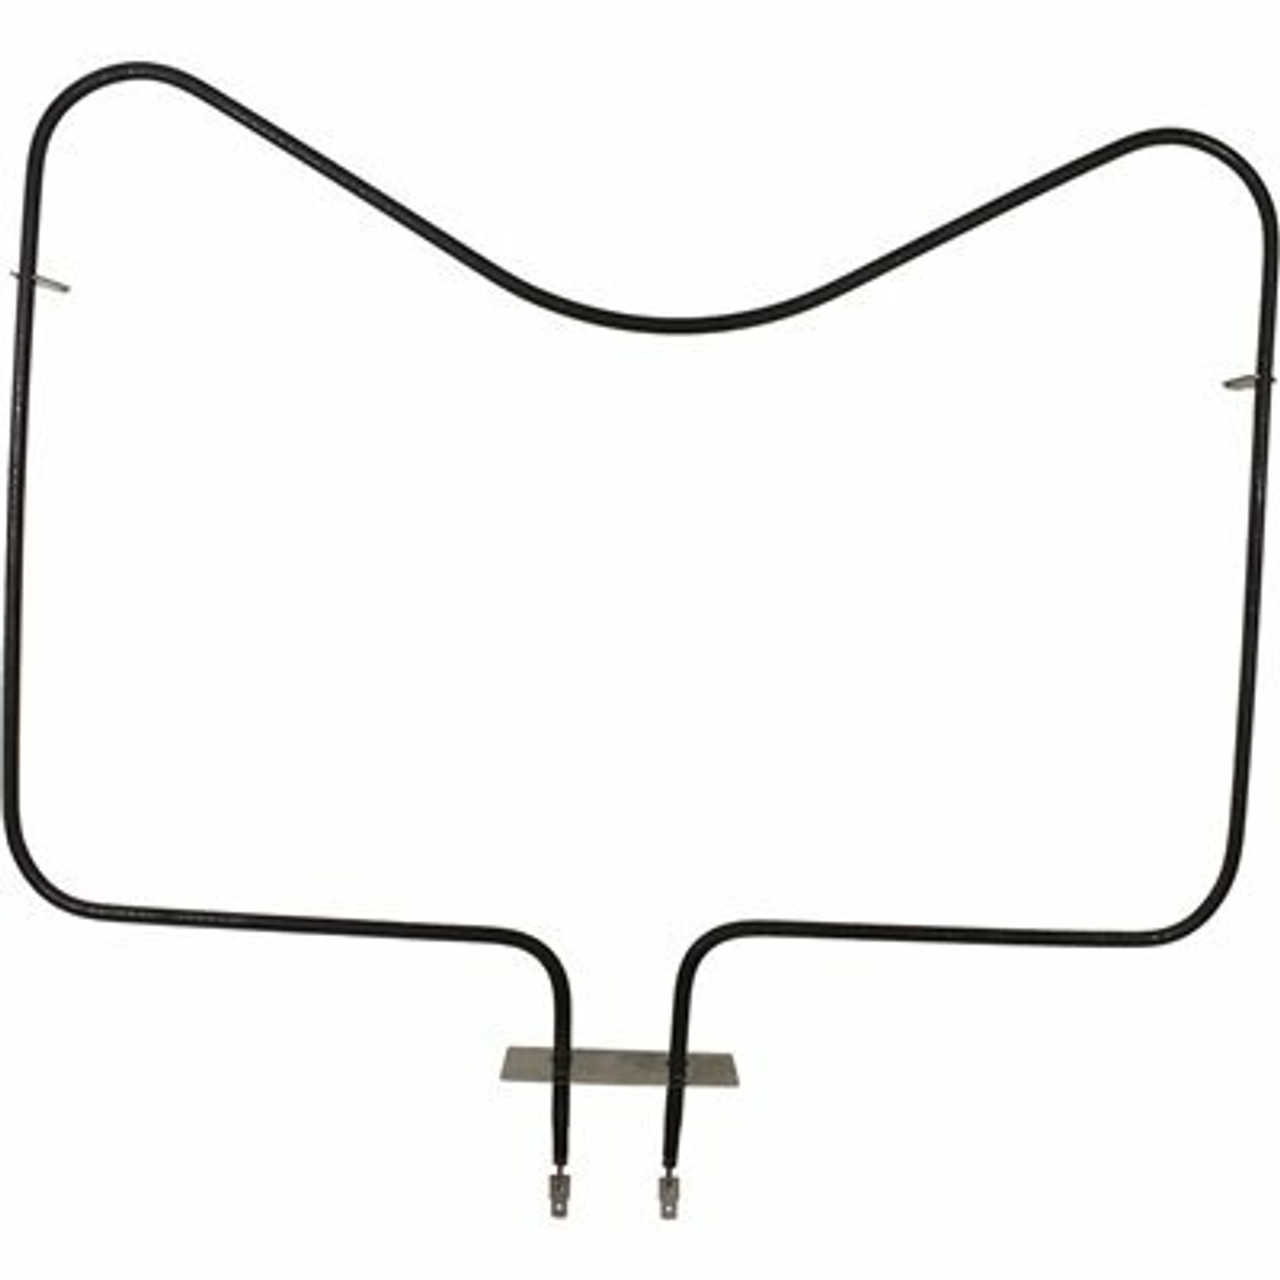 Supco Bake Element Replaces Wp9750213